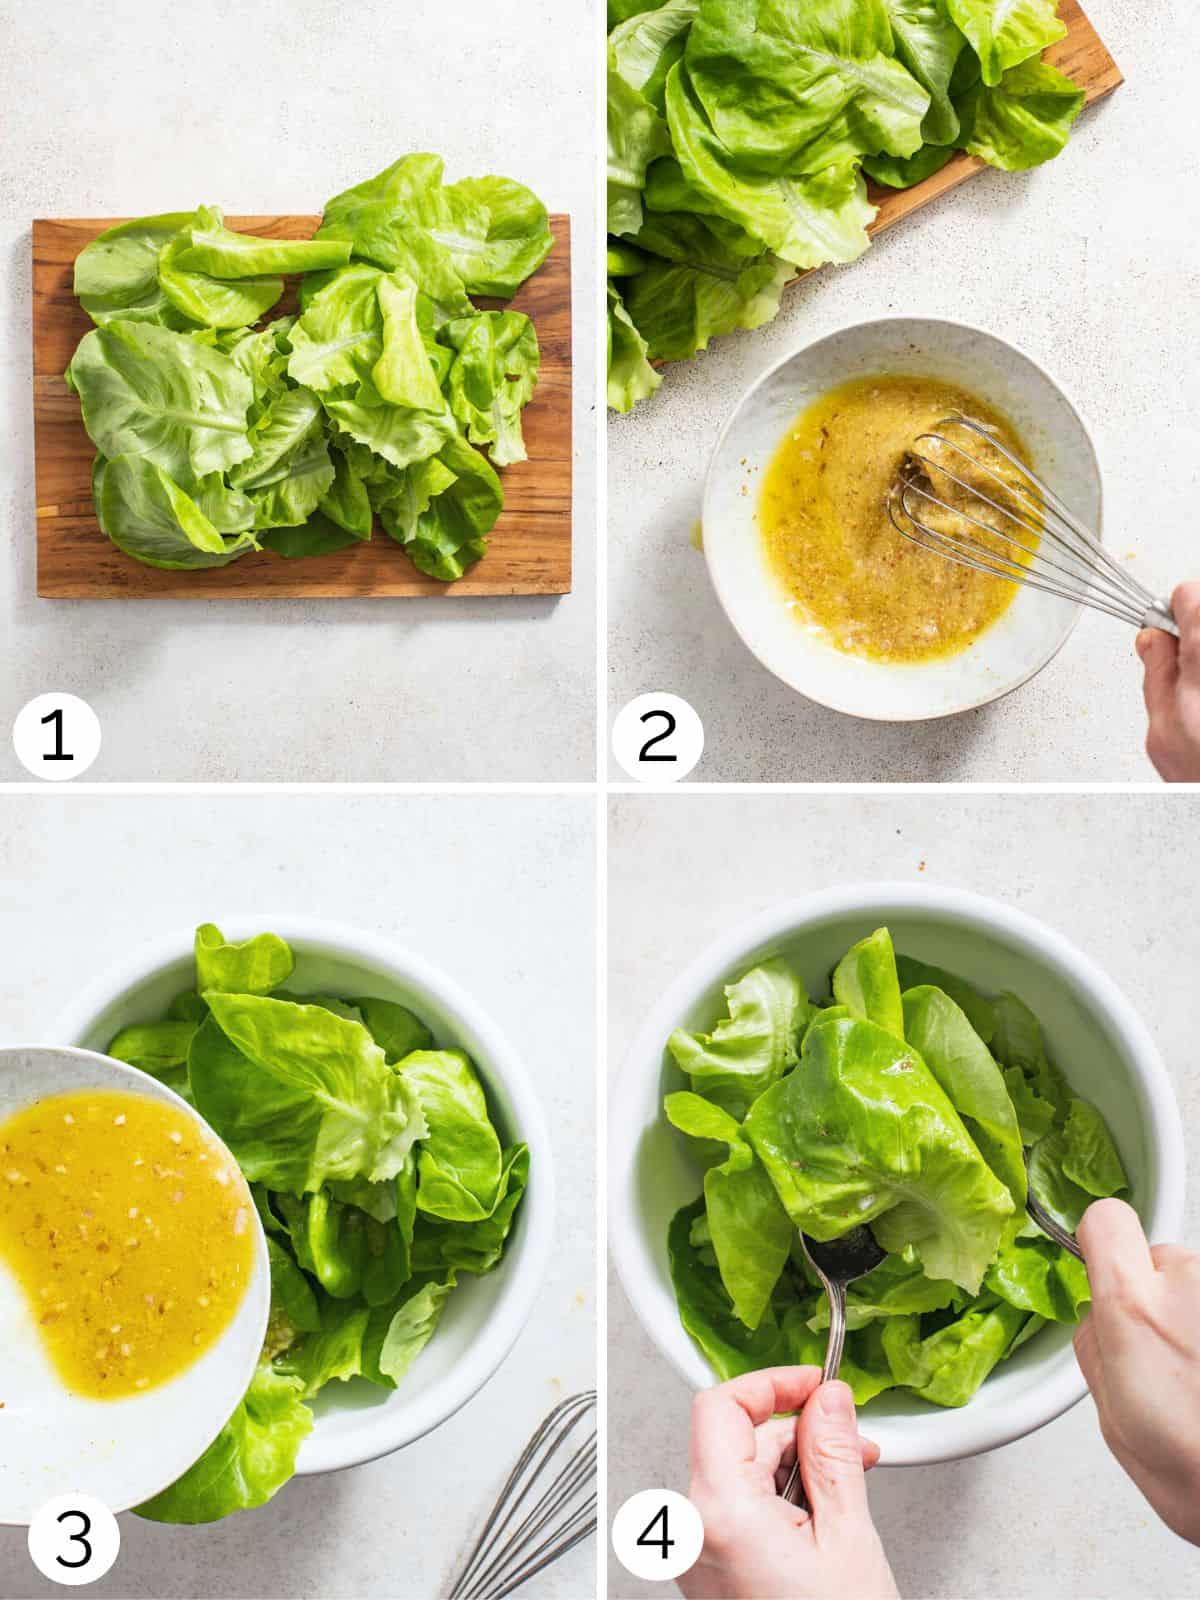 Process for making a butter lettuce side salad.